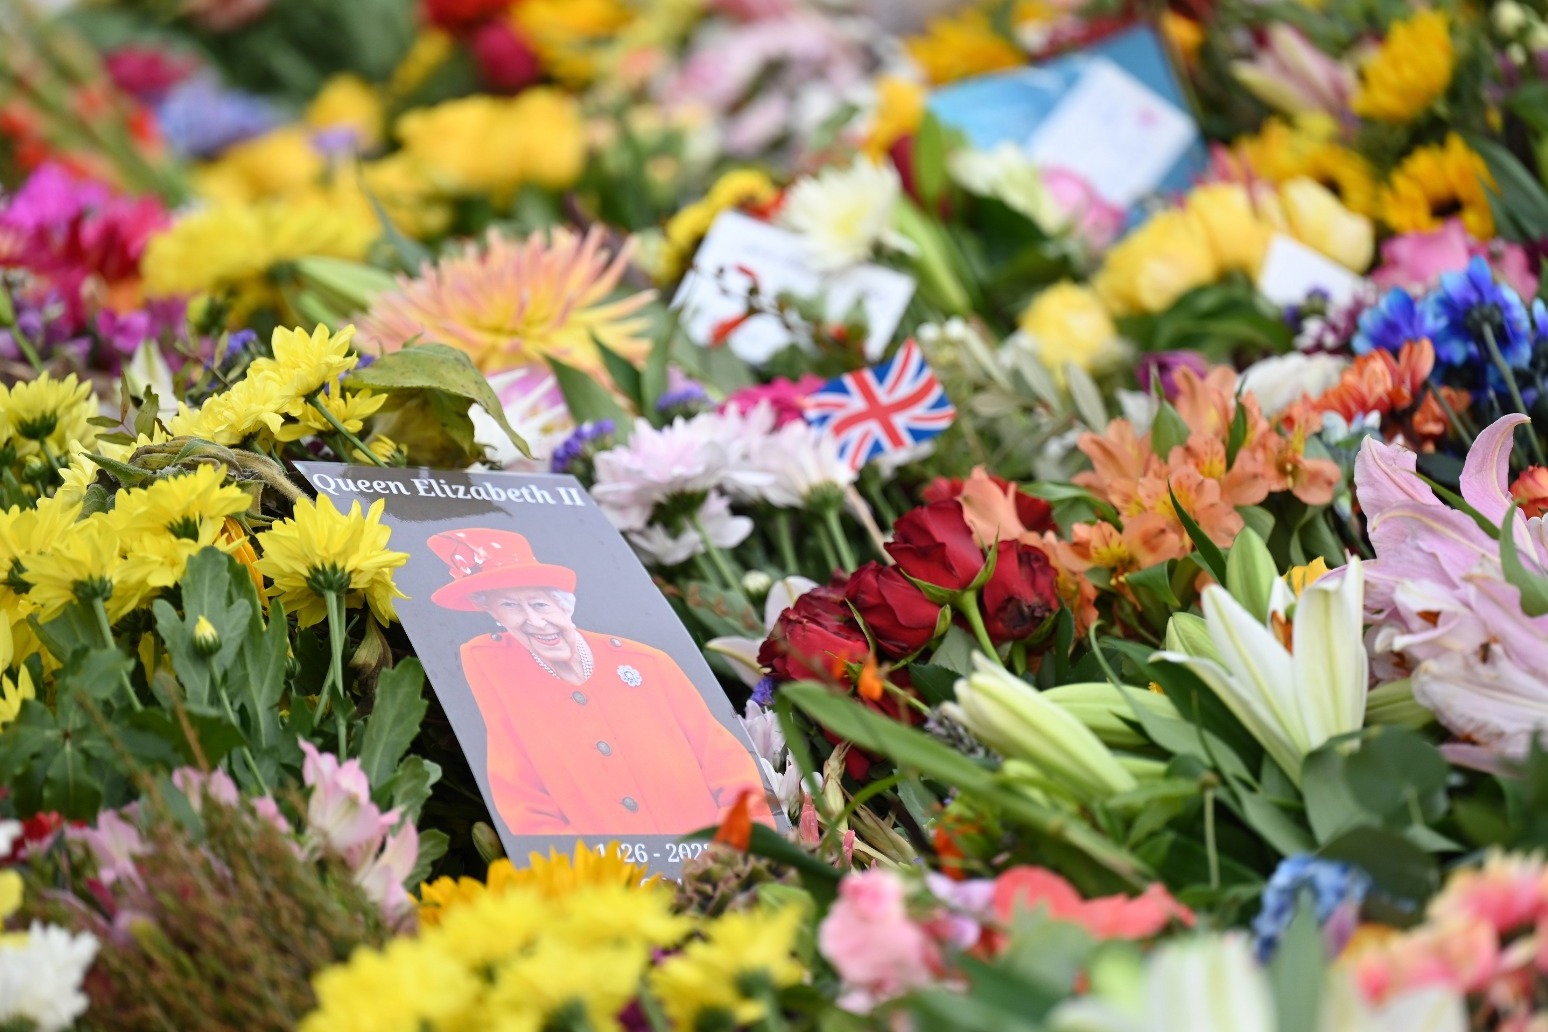 Florists assure mourners they will ‘absolutely cope’ with demand 